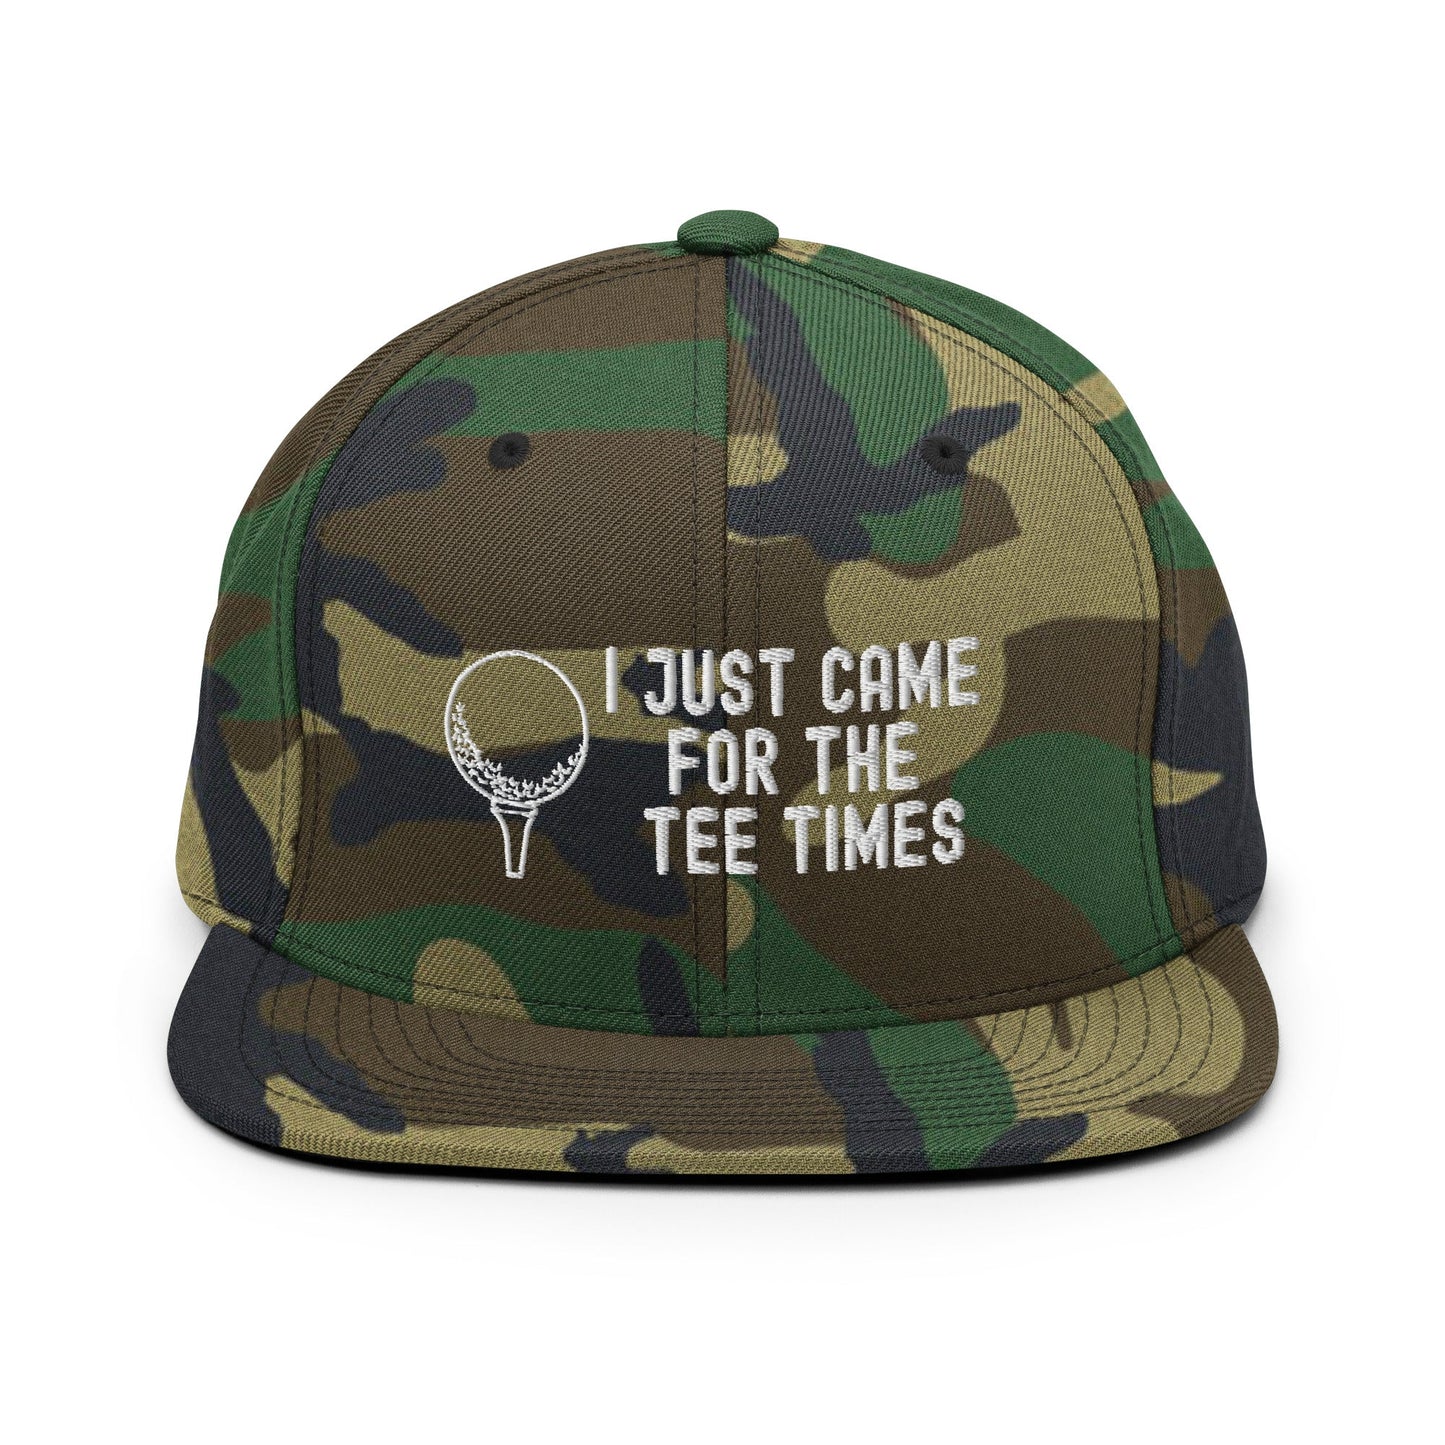 Funny Golfer Gifts  Snapback Hat Green Camo I Just Came For The Tee Times Snapback Hat